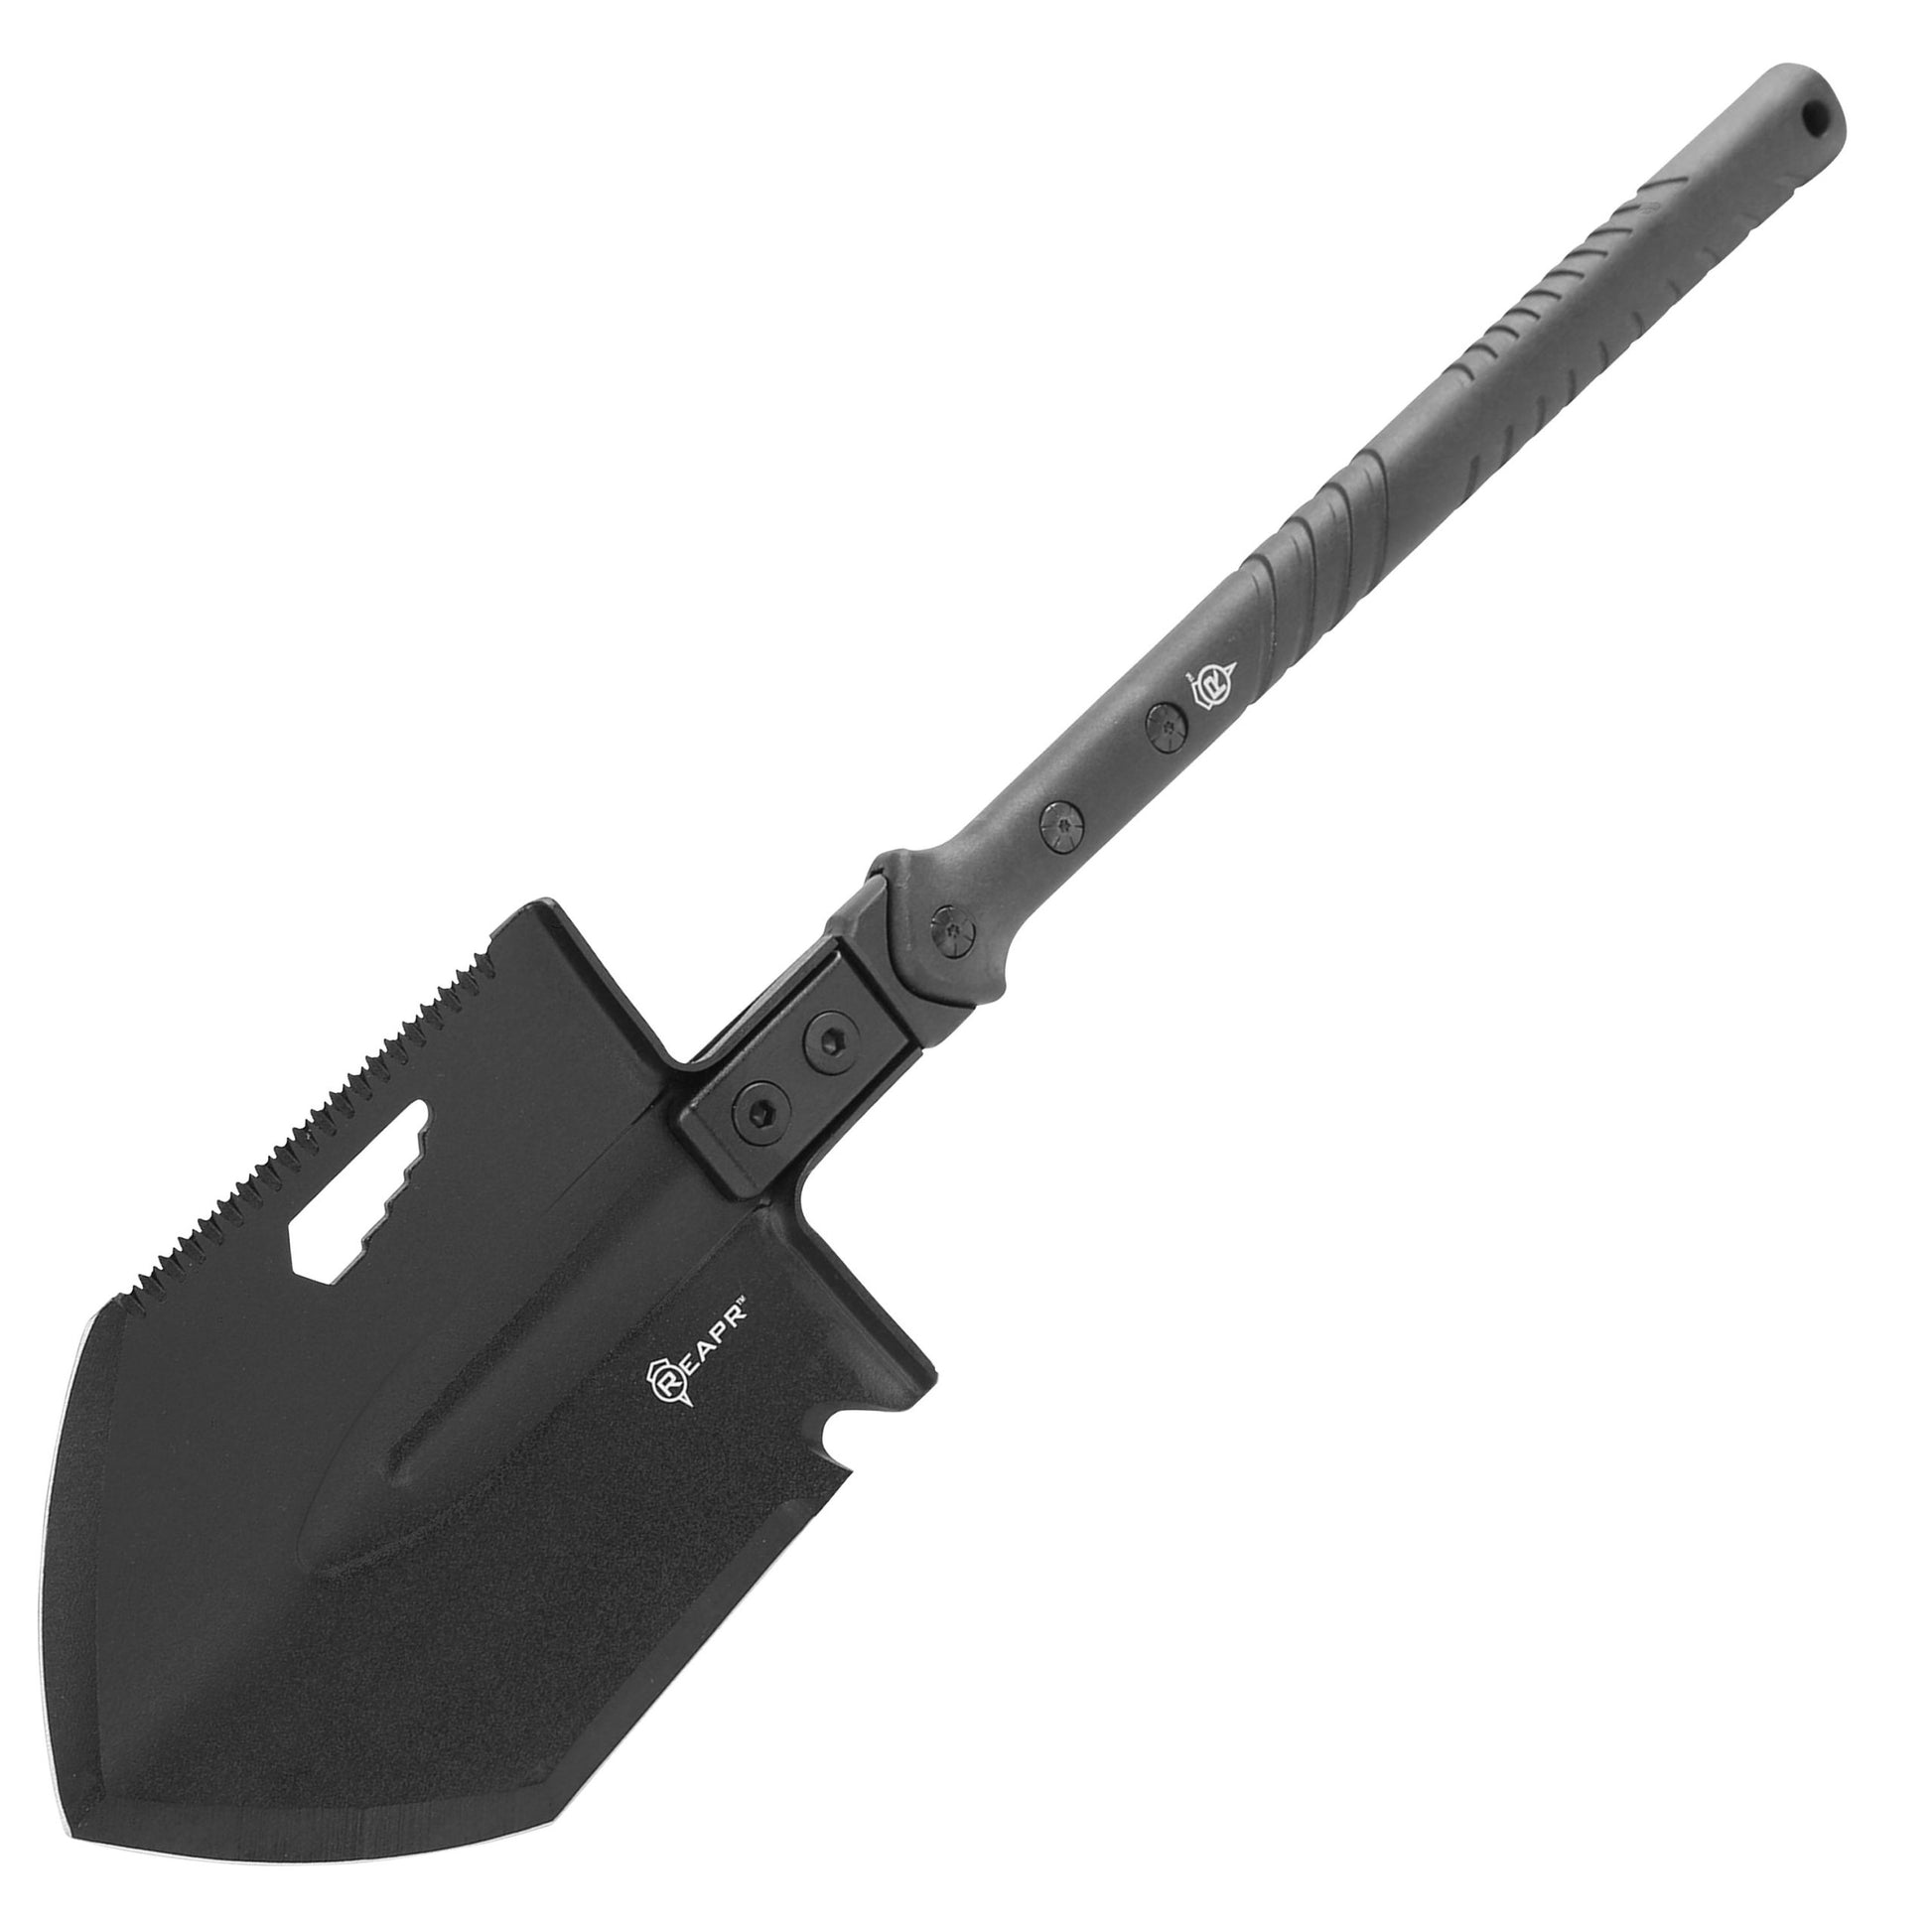 The REAPR 11021 TAC Survival Shovel is the ultimate survival tool shovel. This compact, space saving tool, features a 7 1/2″ stainless steel precision cast head (with a powder coat wrinkle finish) combining a saw edge, ripper, chopping edge and wrenches. www.defenceqstore.com.au